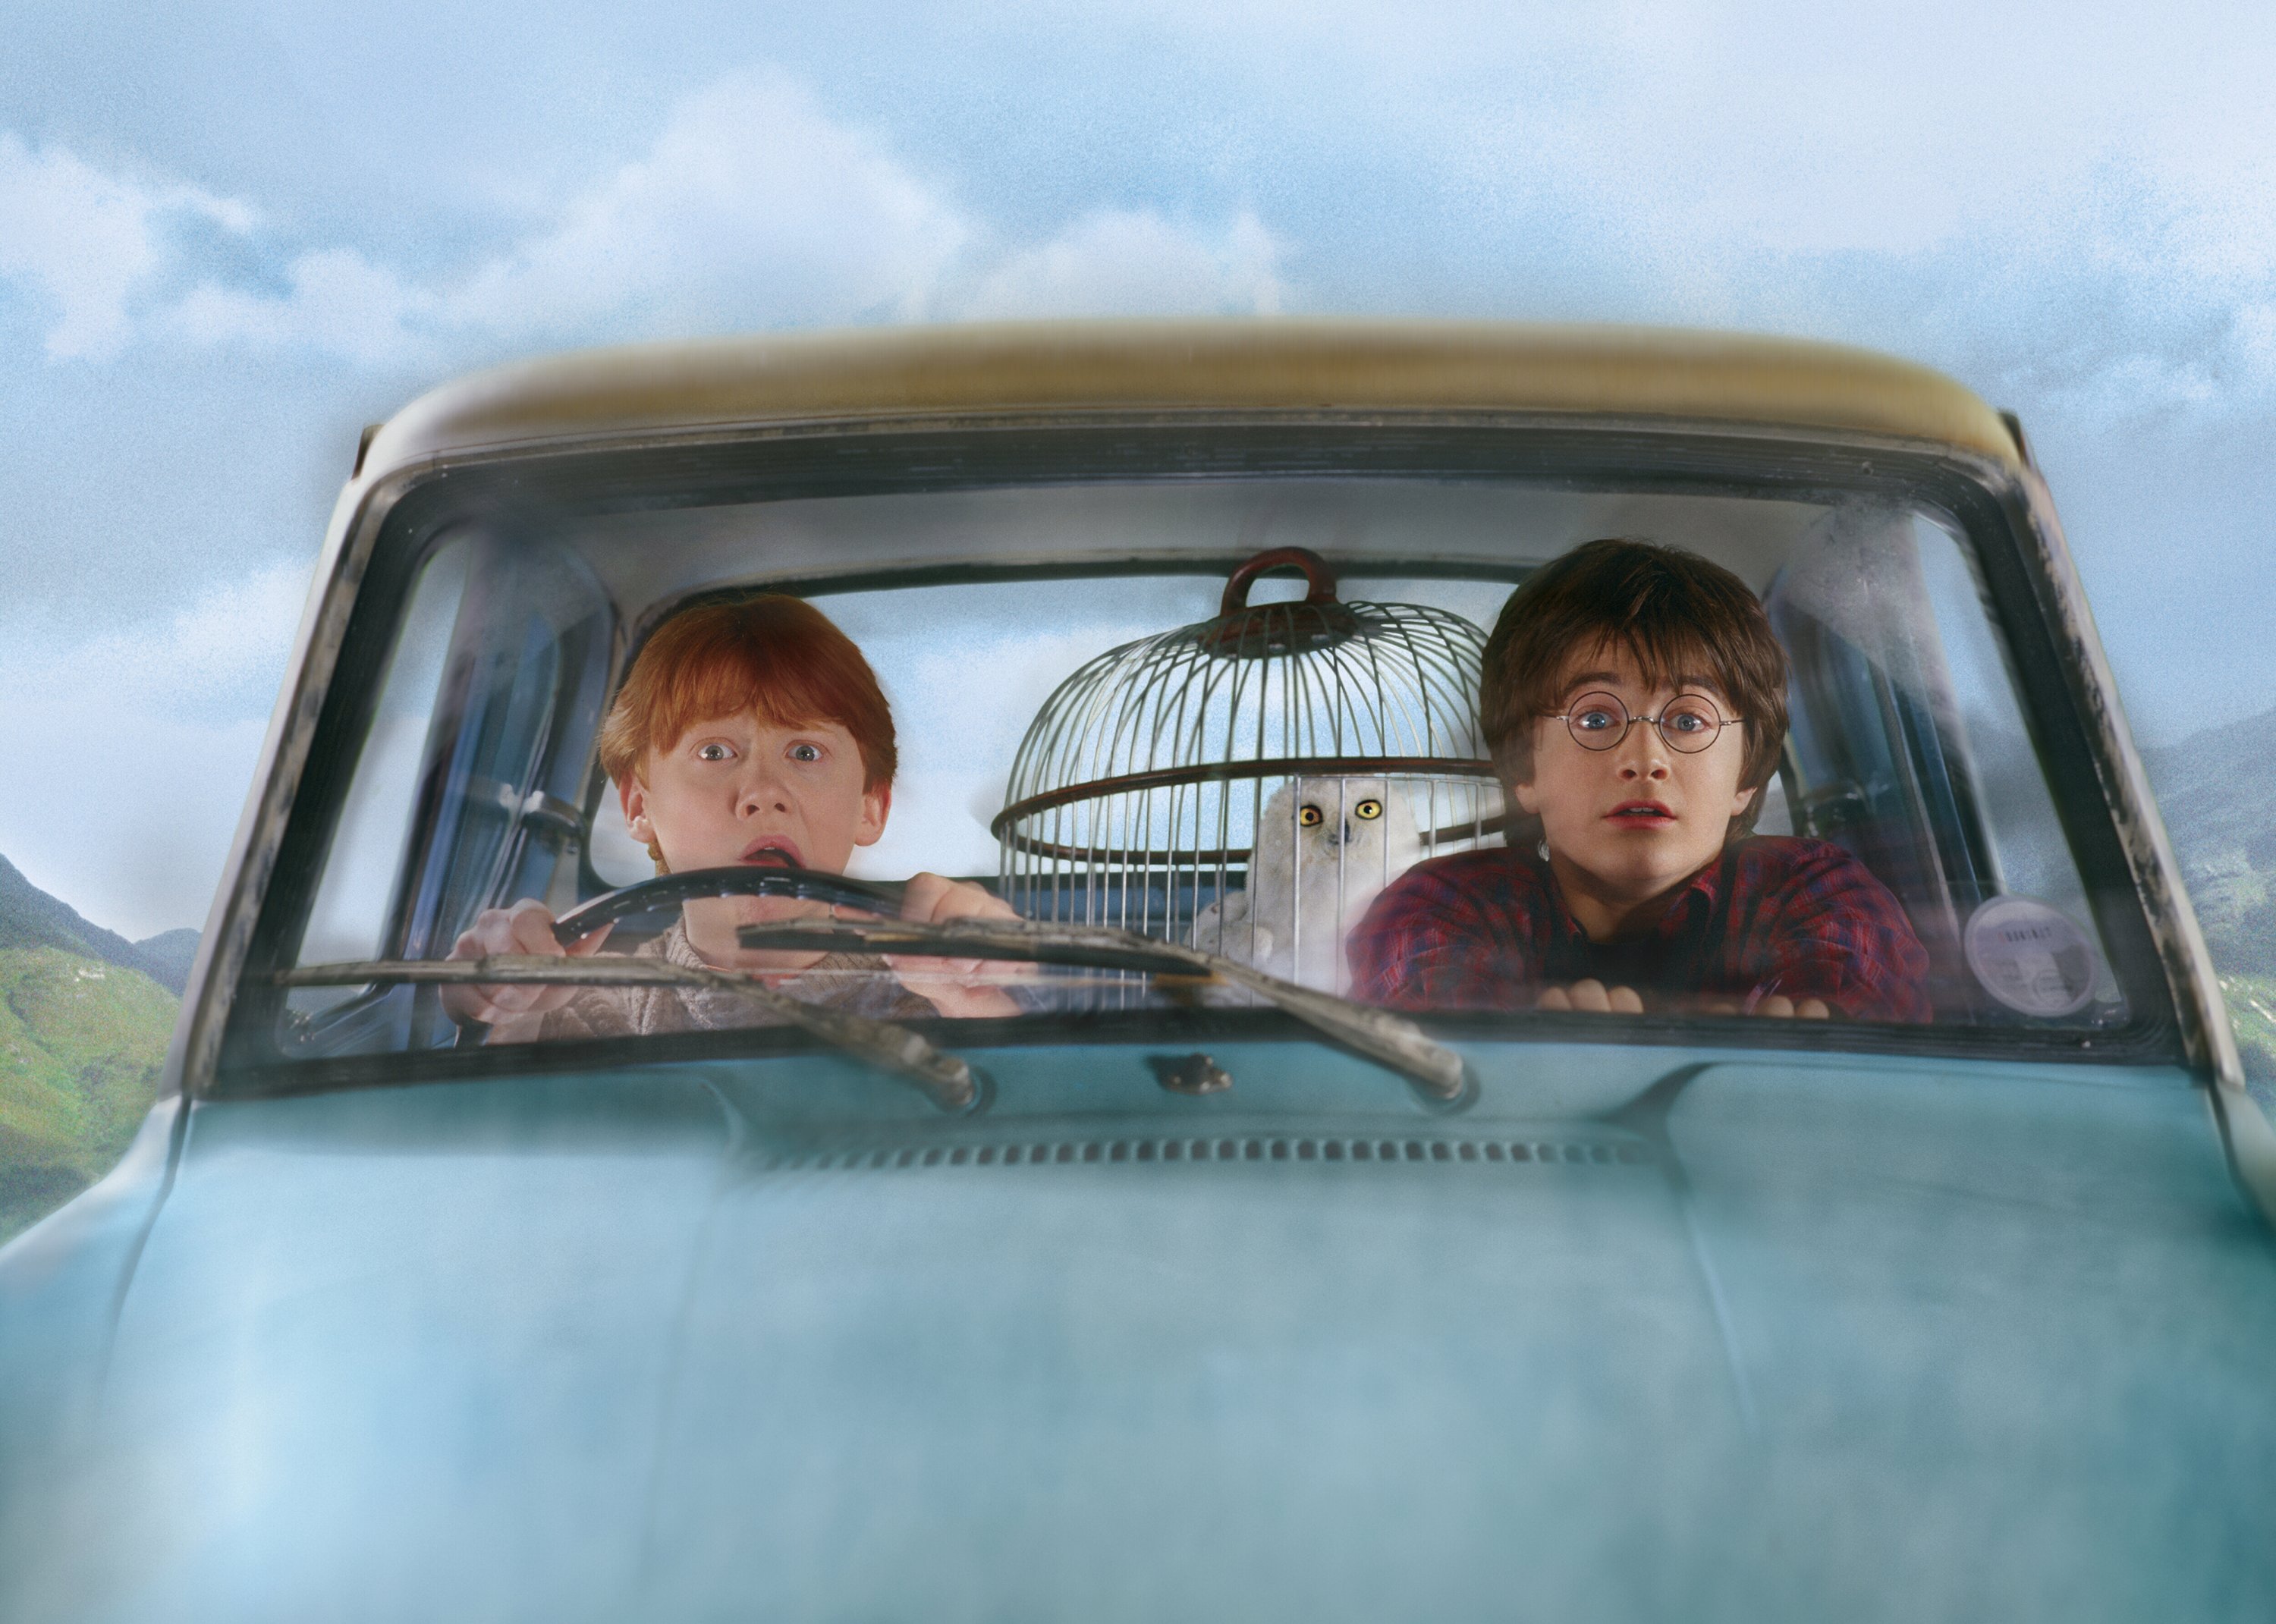 harry potter, movie, harry potter and the chamber of secrets, daniel radcliffe, ron weasley, rupert grint